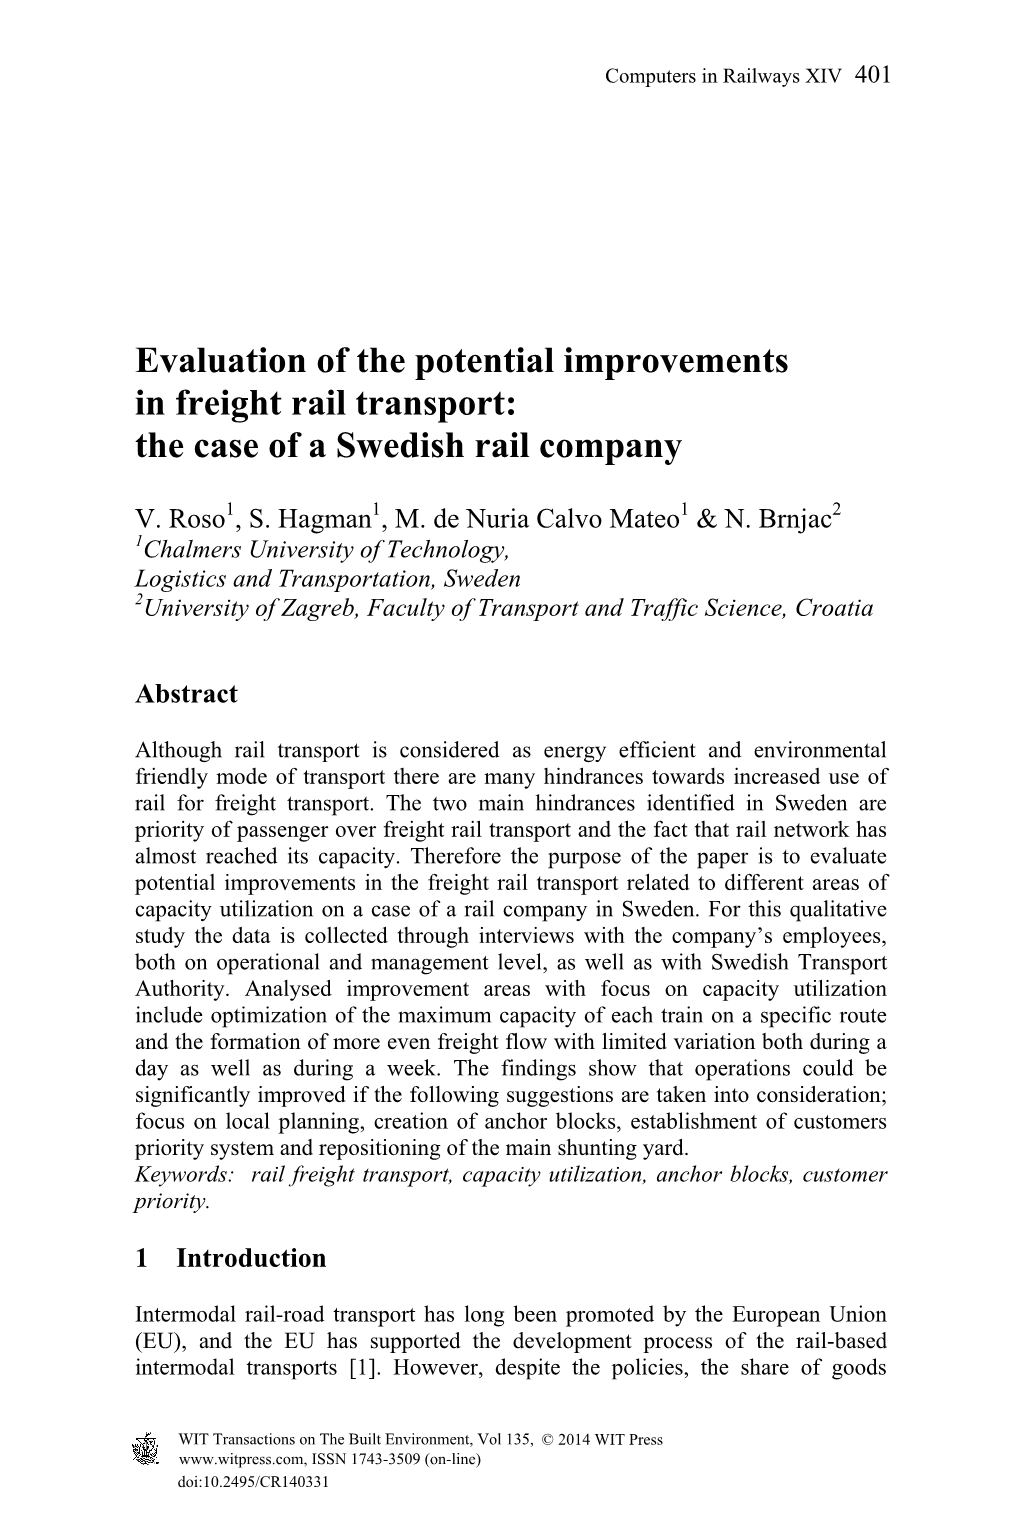 Evaluation of the Potential Improvements in Freight Rail Transport: the Case of a Swedish Rail Company